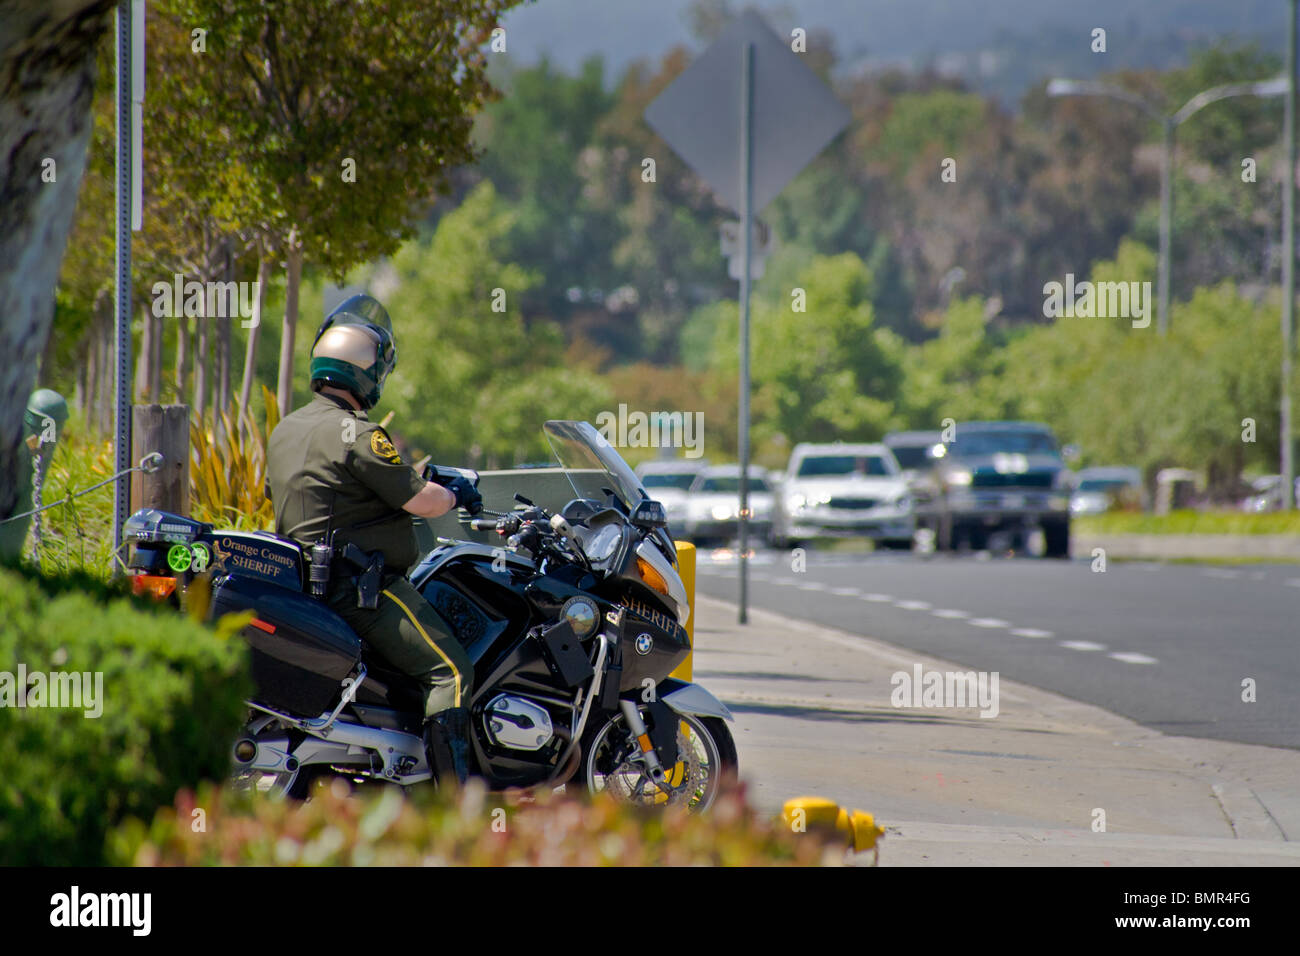 Seeking to apprehend speeders, a motorcycle policeman raises his speed-checking 'radar gun' as oncoming traffic approaches in La Stock Photo